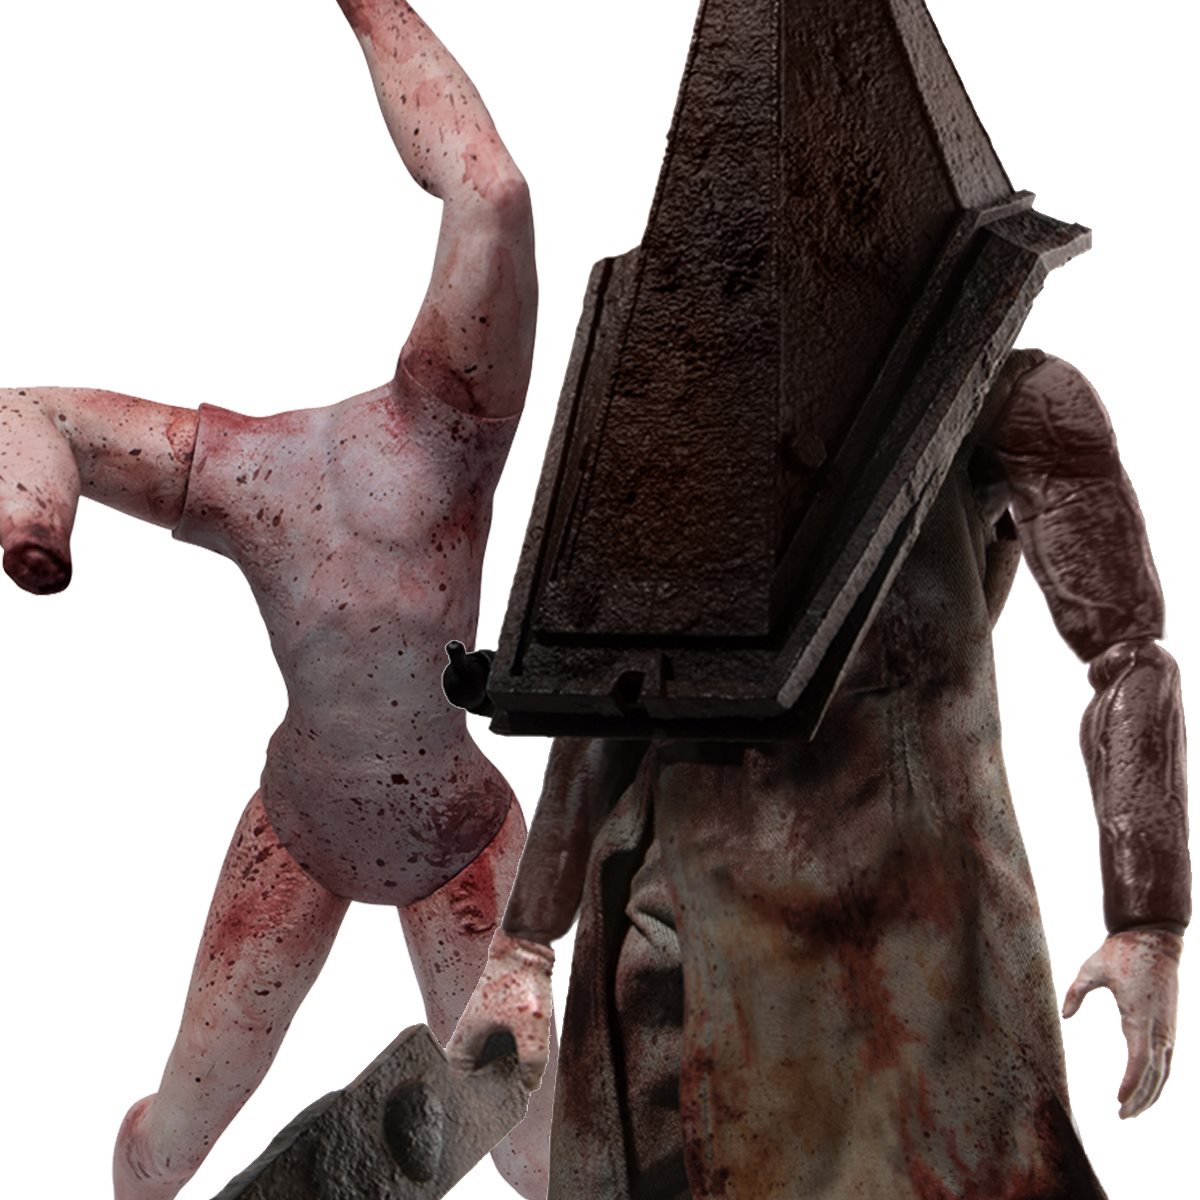 pyramid character silent hill - Google Search